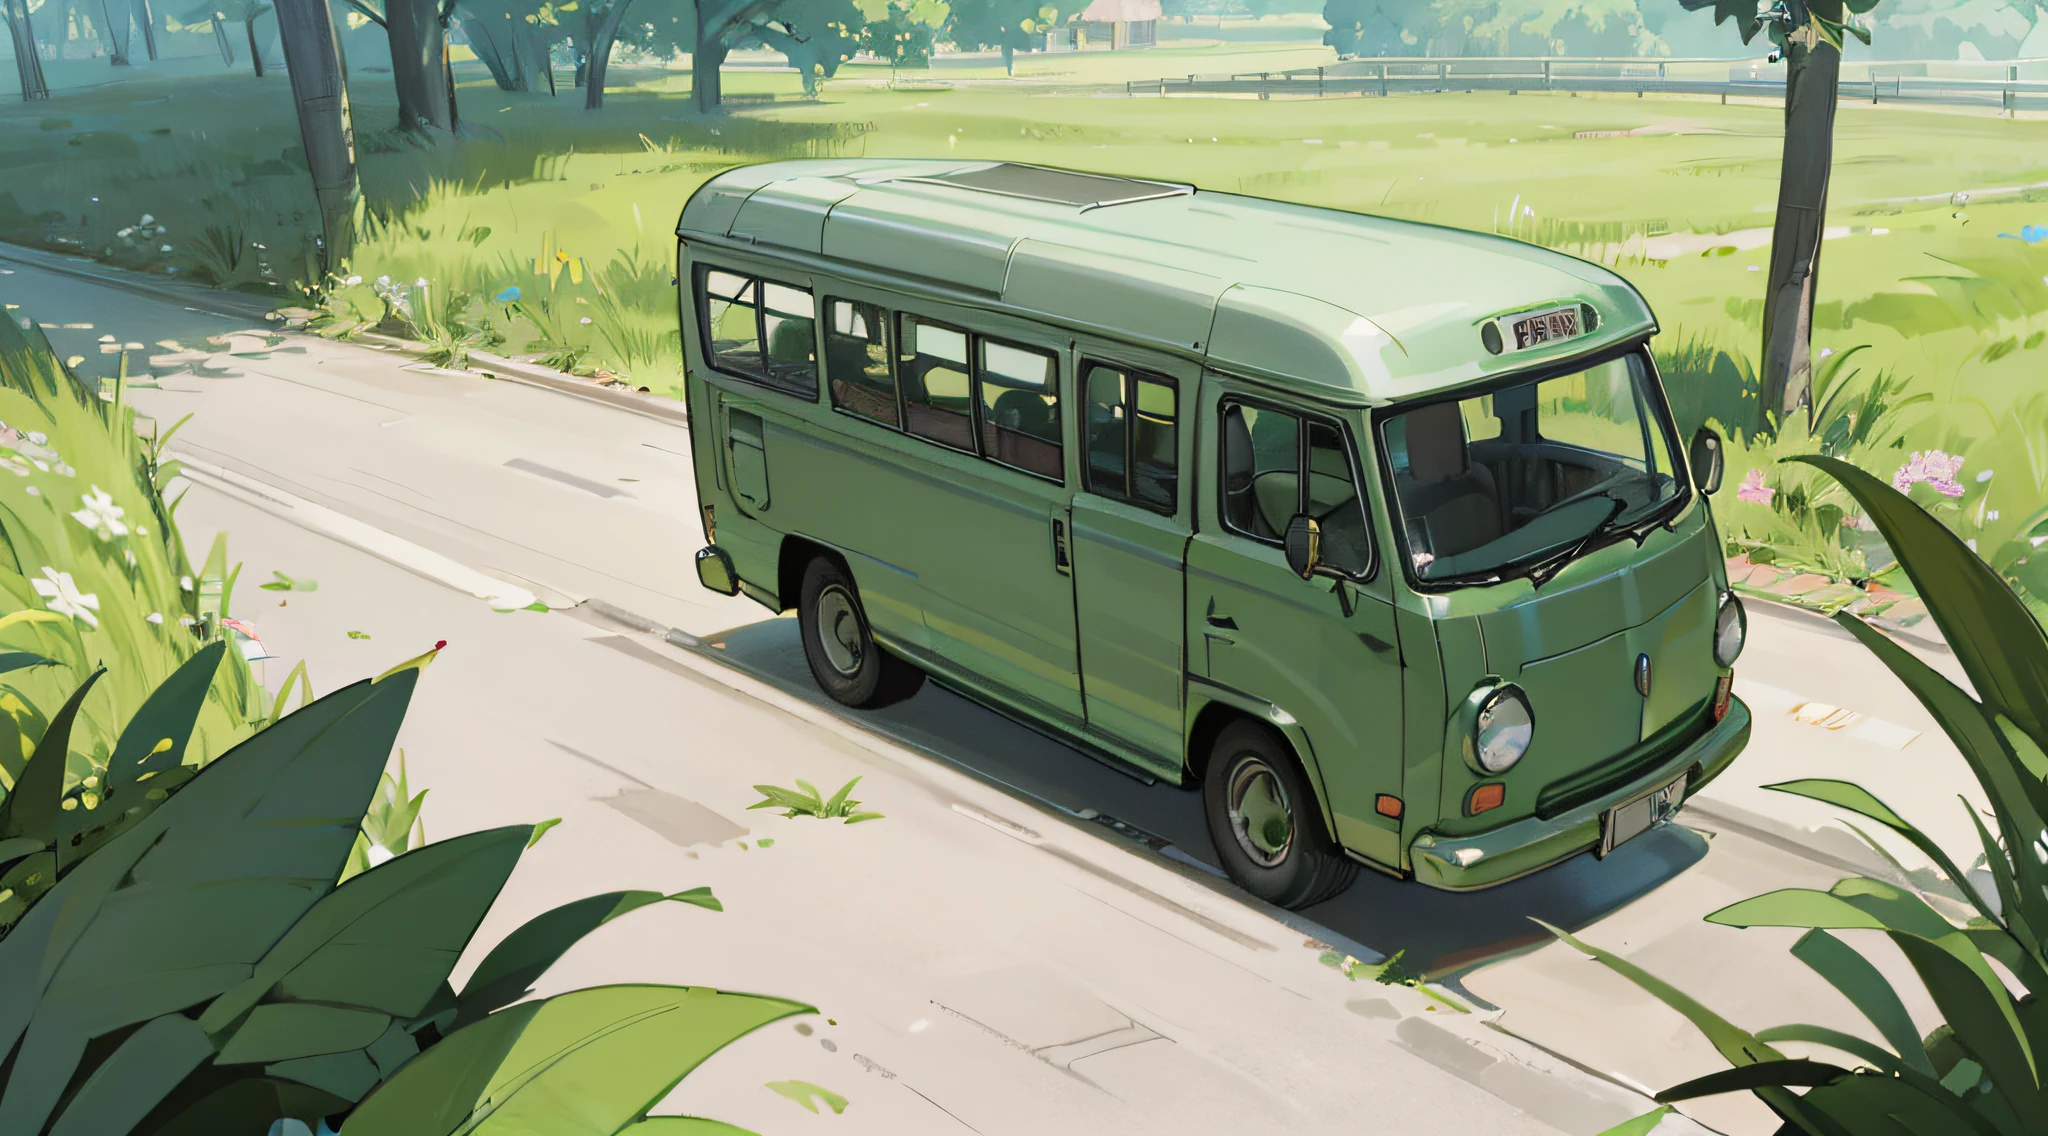 there is a green and white bus driving down the road, amazing wallpaper, kombi, high quality wallpaper, wallpaper mobile, high quality desktop wallpaper, bulli, hd wallpaper, iphone wallpaper, wallpaper 4k, wallpaper 4 k, rob rey and kentaro miura style, bussiere rutkowski andreas rocha, jen bartel